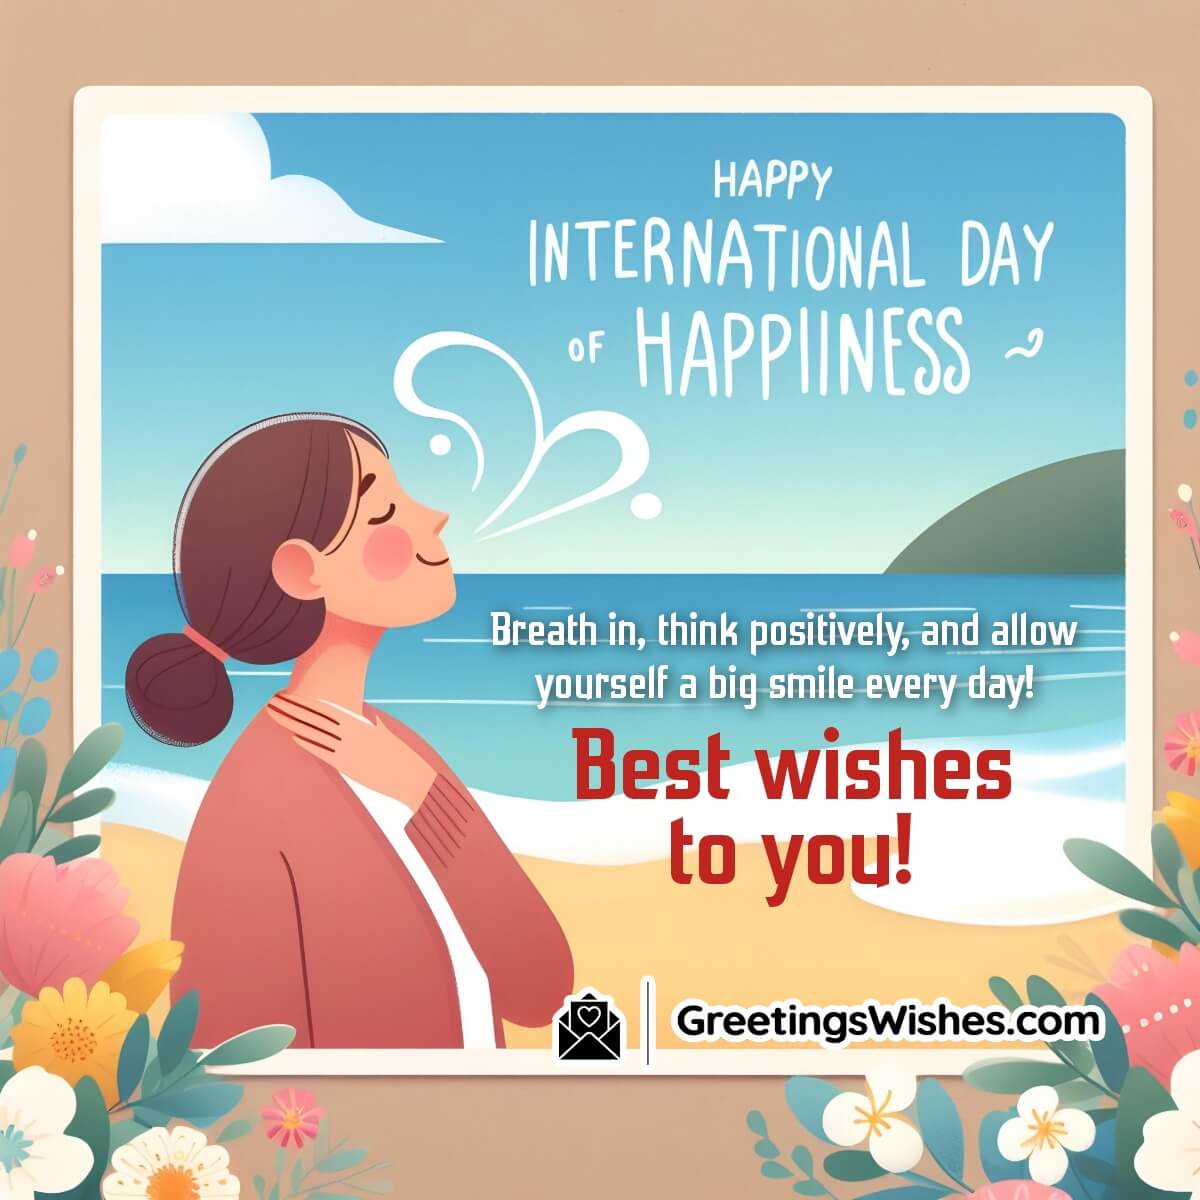 Best Wishes On International Day Of Happiness